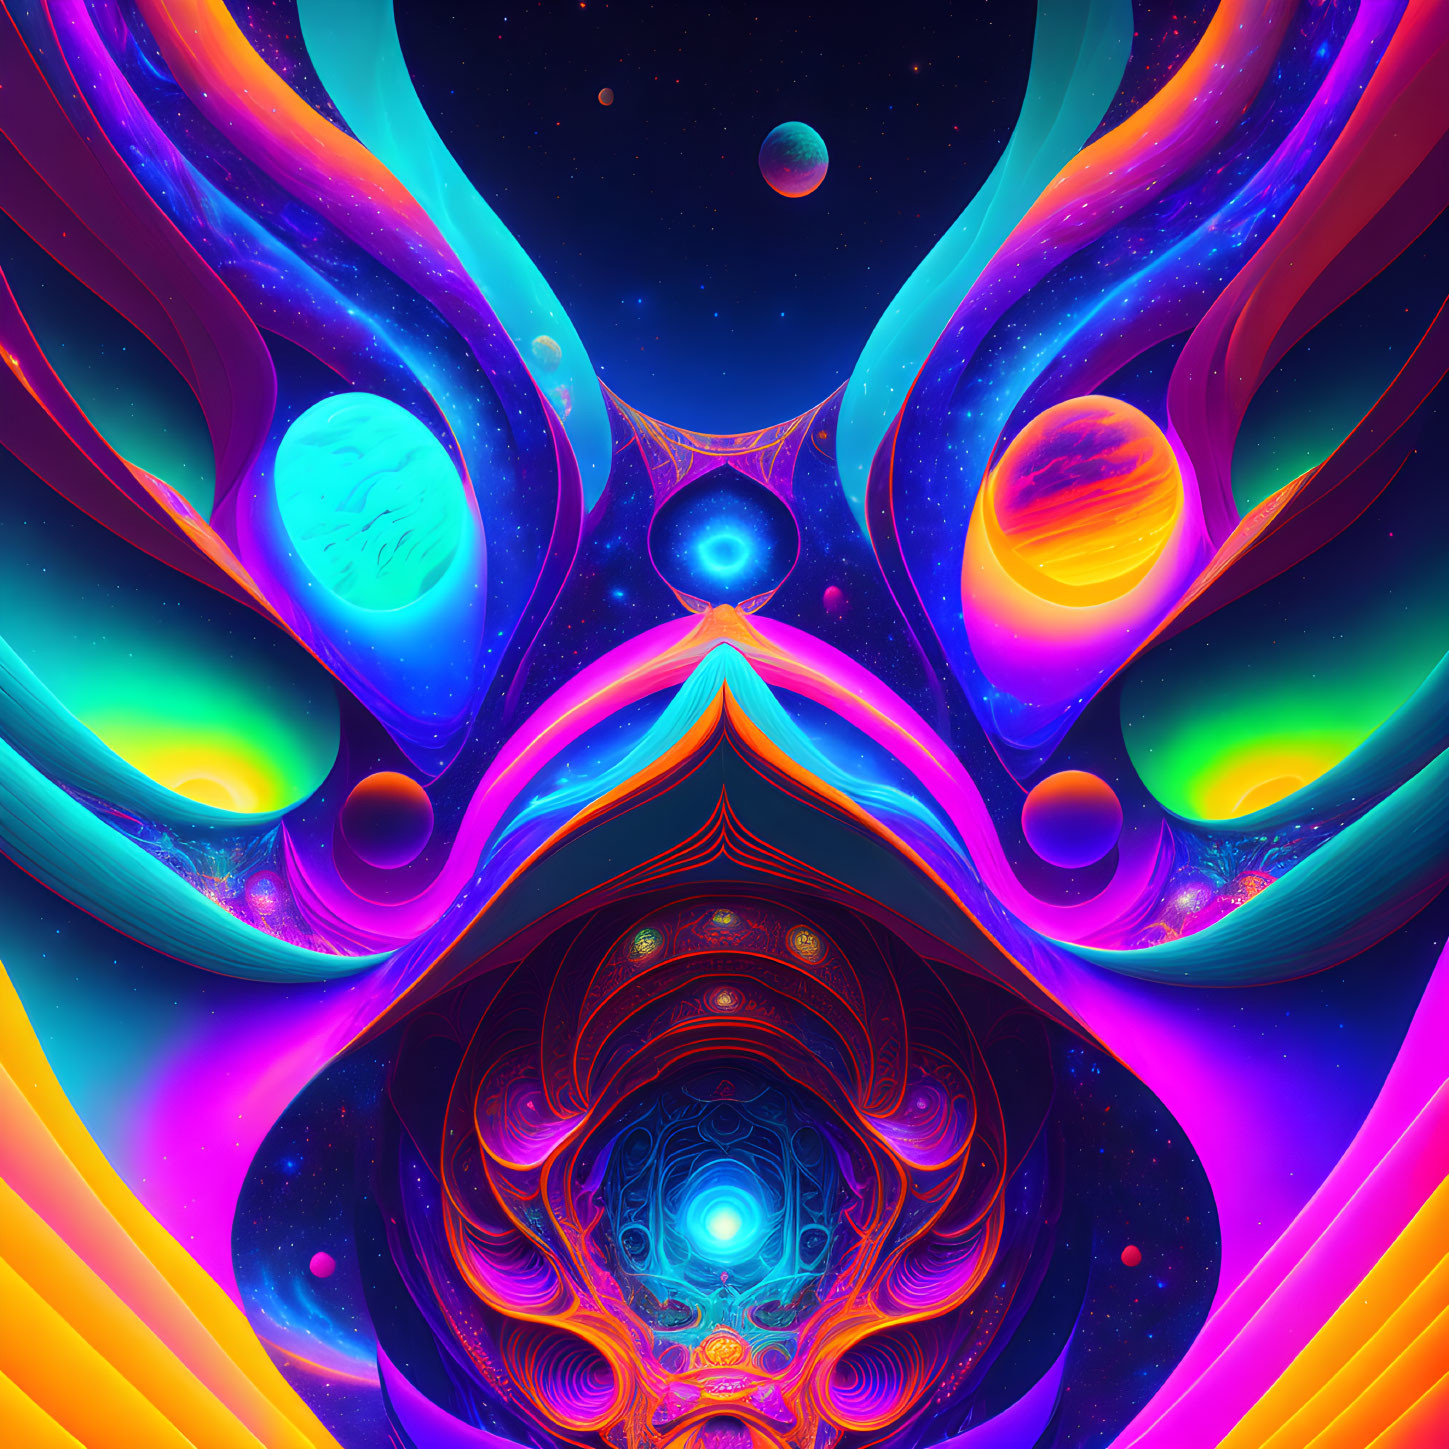 Vibrant psychedelic space-themed digital art with abstract cosmic patterns